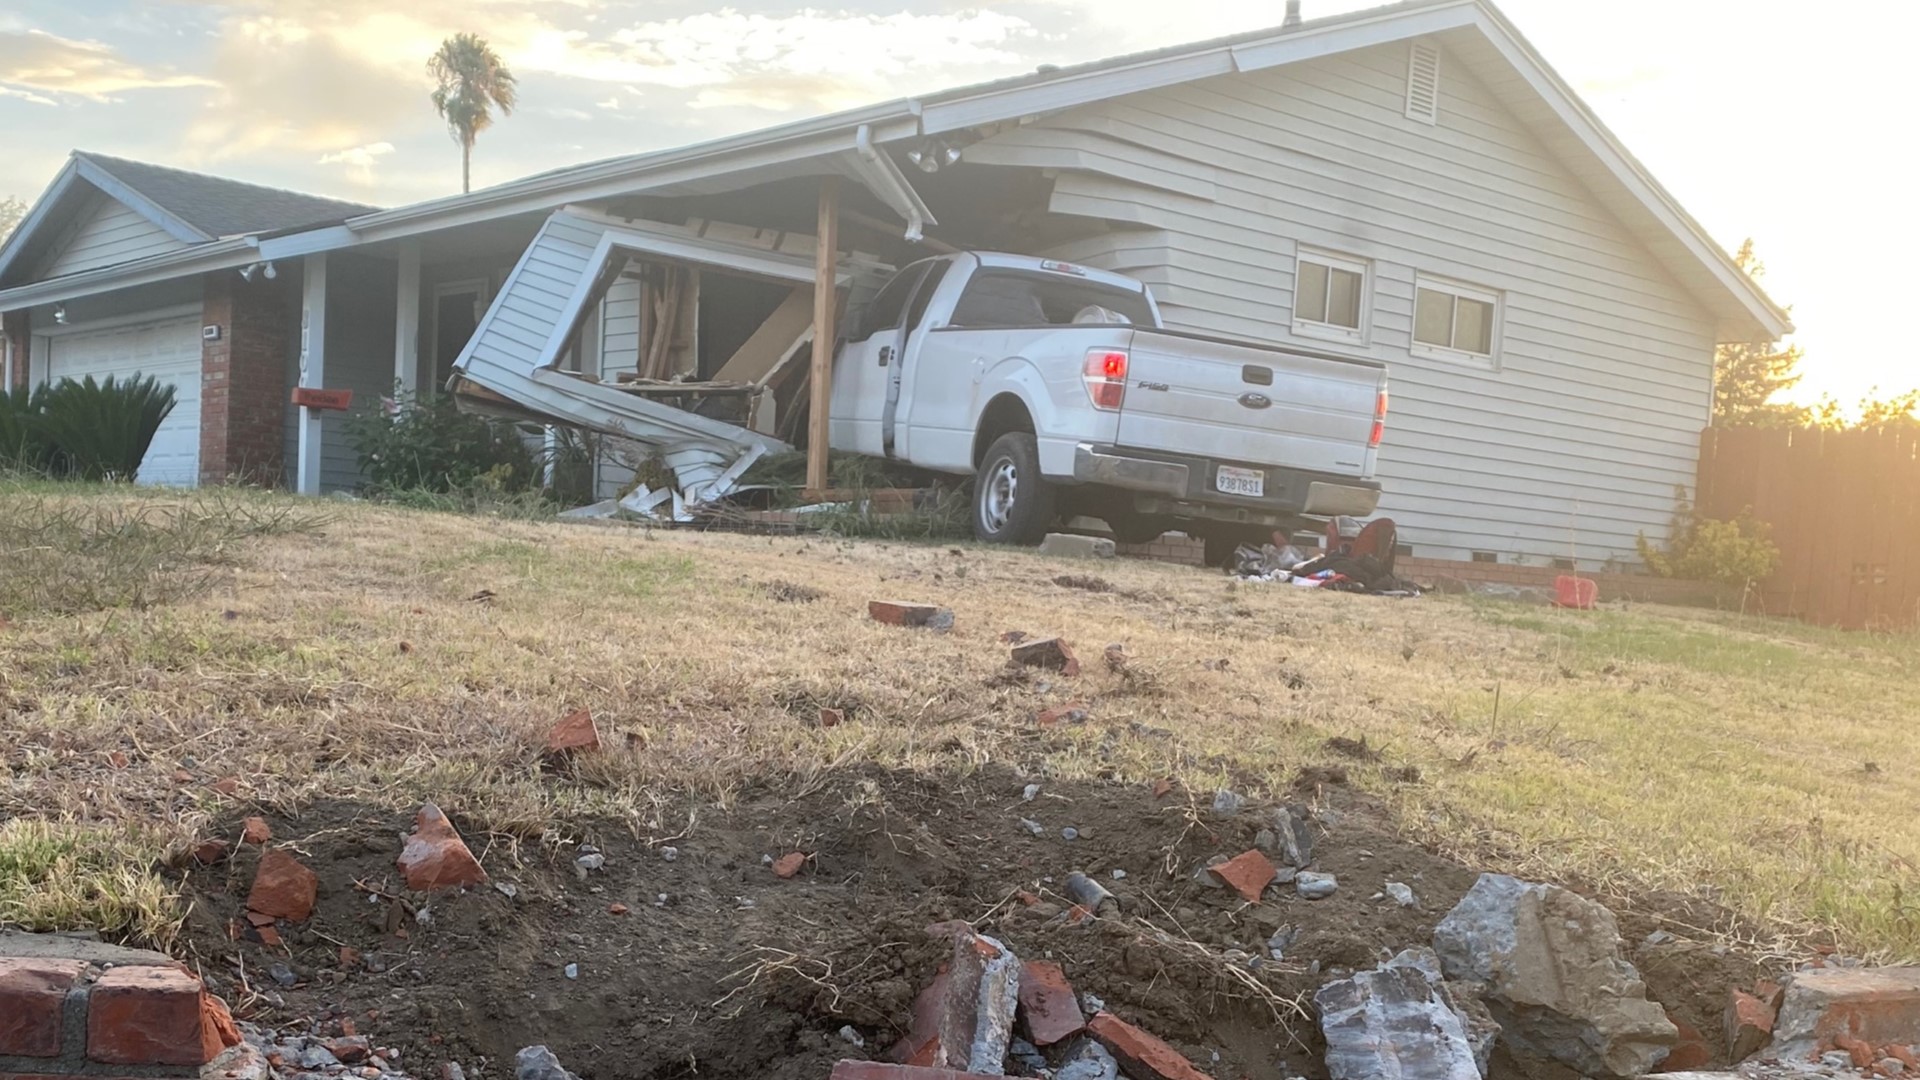 Police say a chase came to an abrupt end after a suspect drove into a home near South Sacramento.